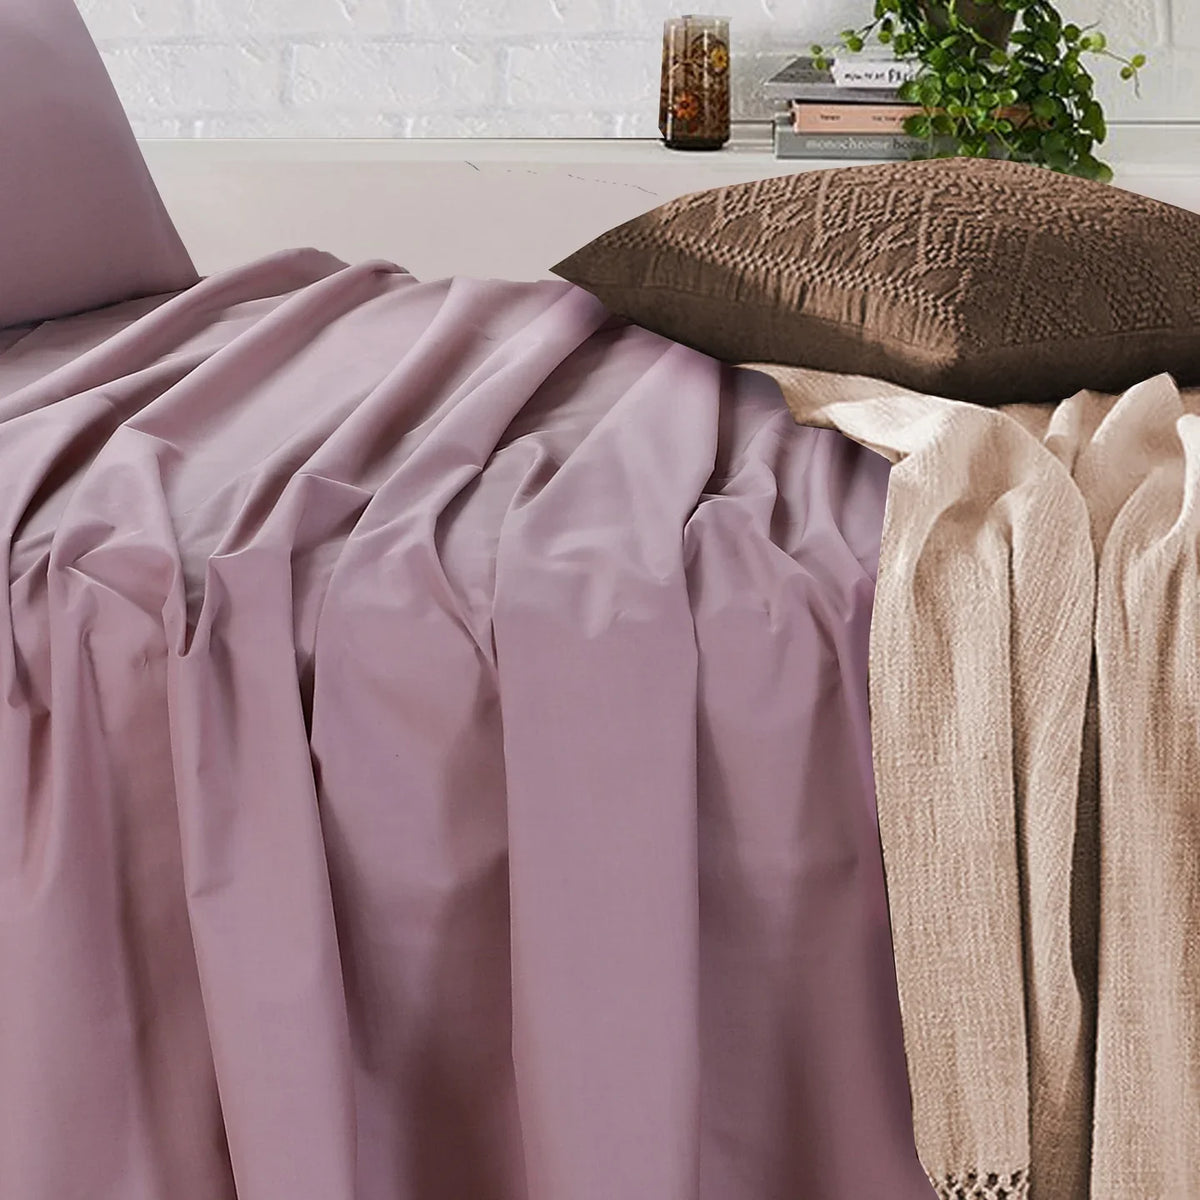 Flat and Fitted Bedsheets Set With Pillowcases -Dusky Pink